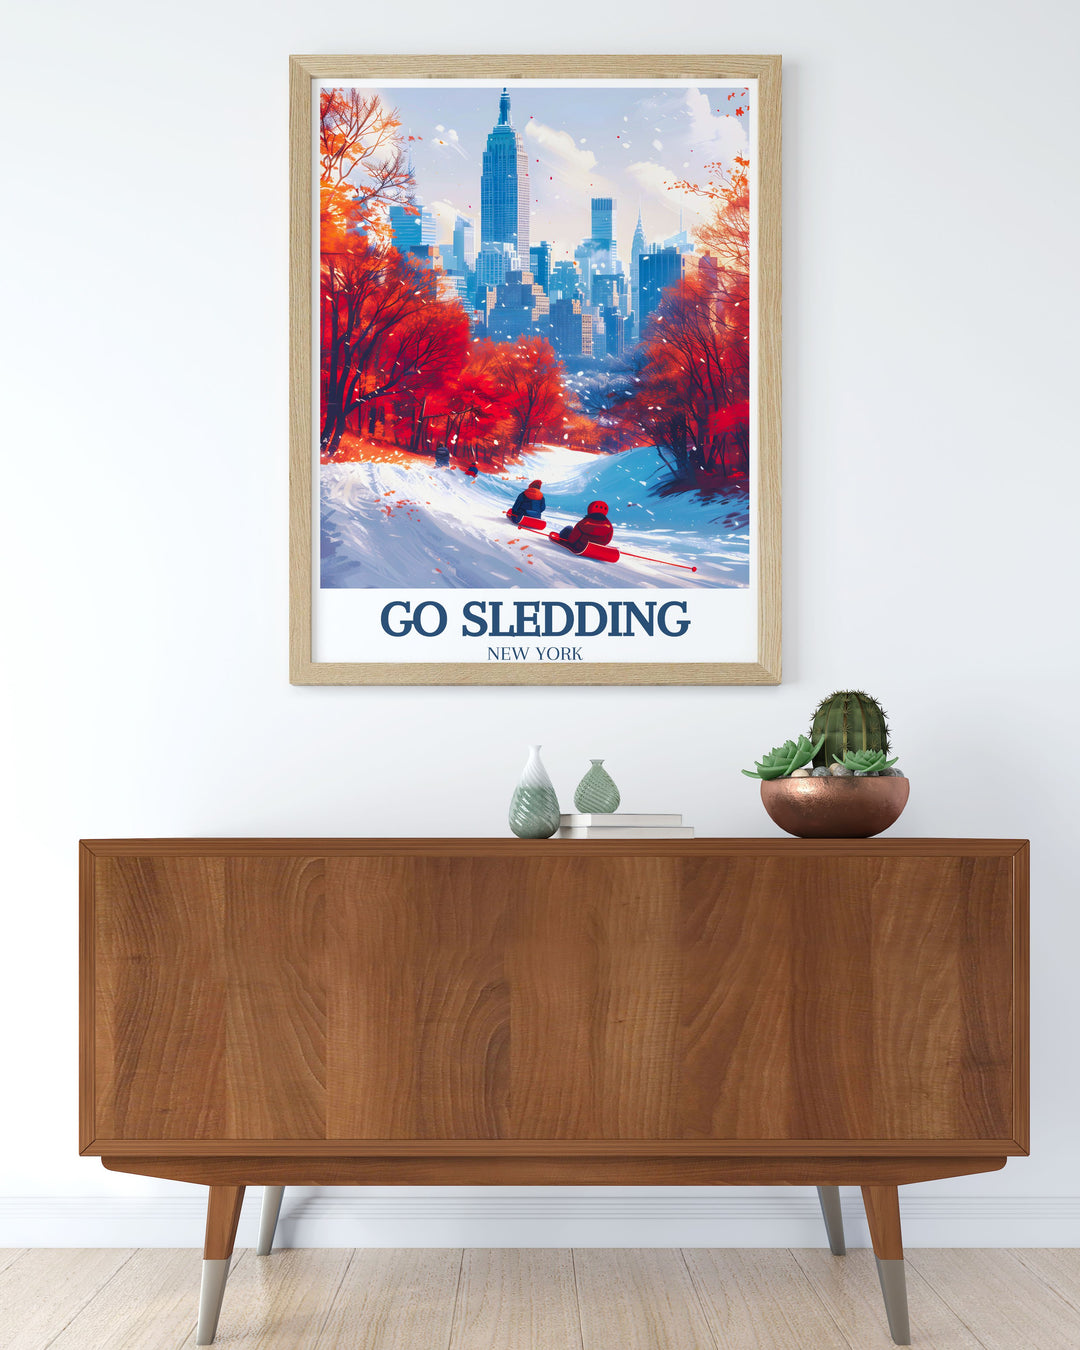 Travel poster featuring a picturesque view of Central Park covered in snow, with sledders racing down the hills under a clear winter sky.